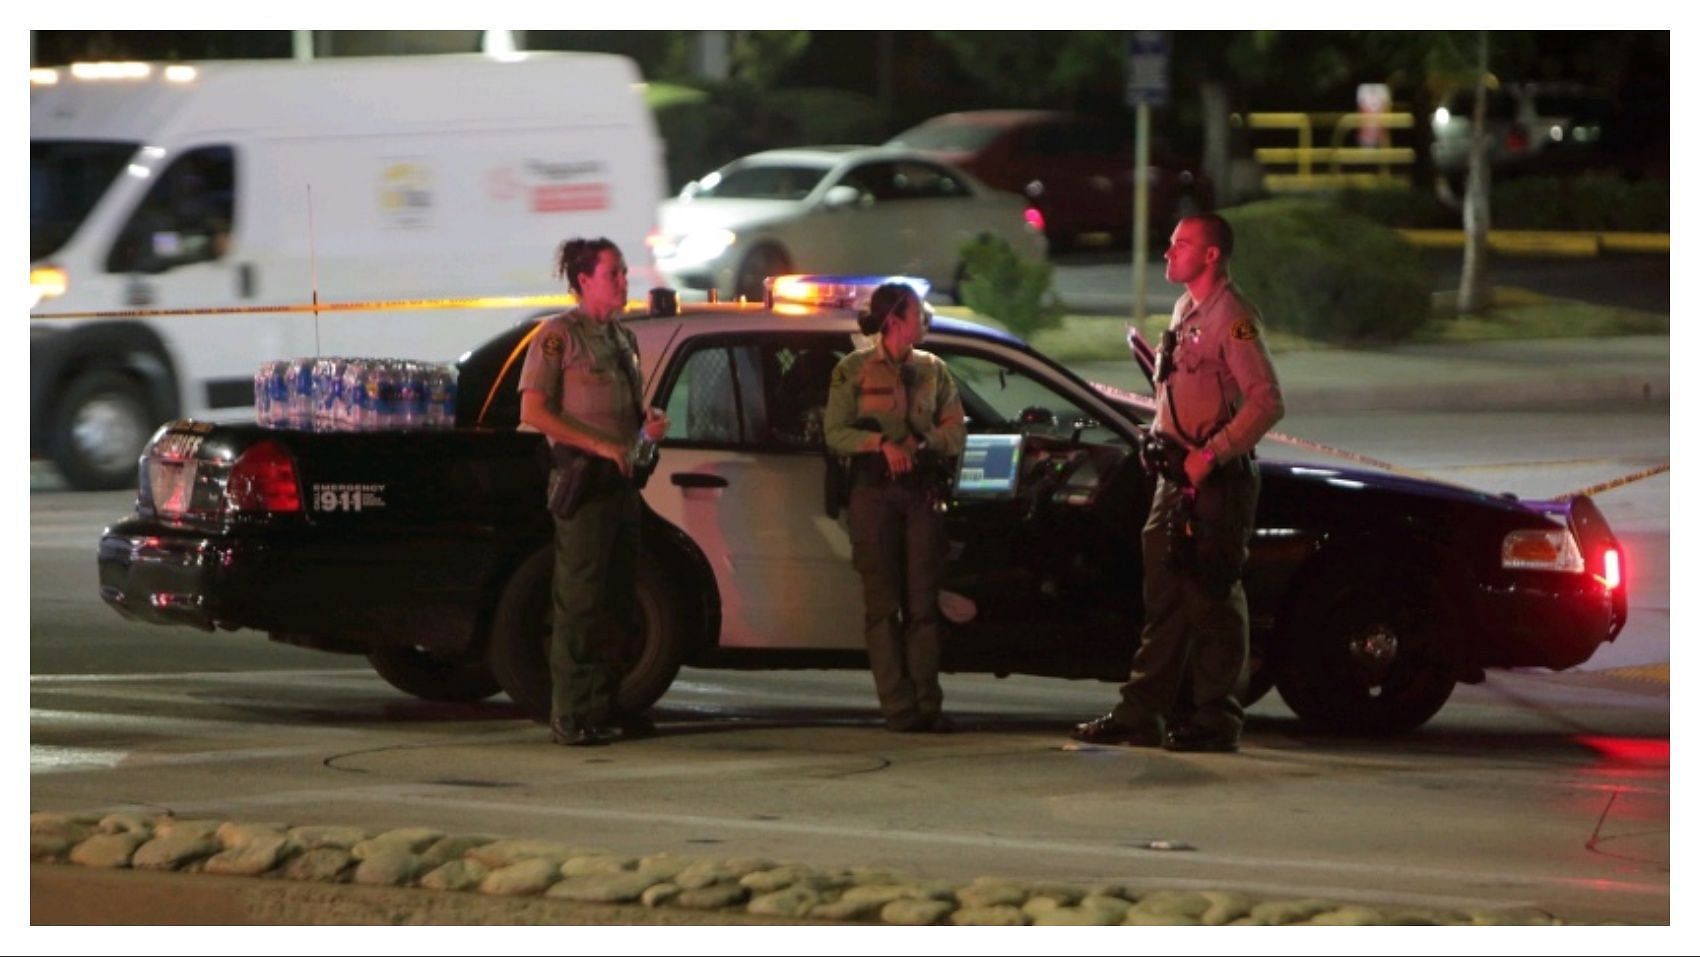 The shootout in Arcadia, California, left a police officer and two others injured (Image via Getty Images)